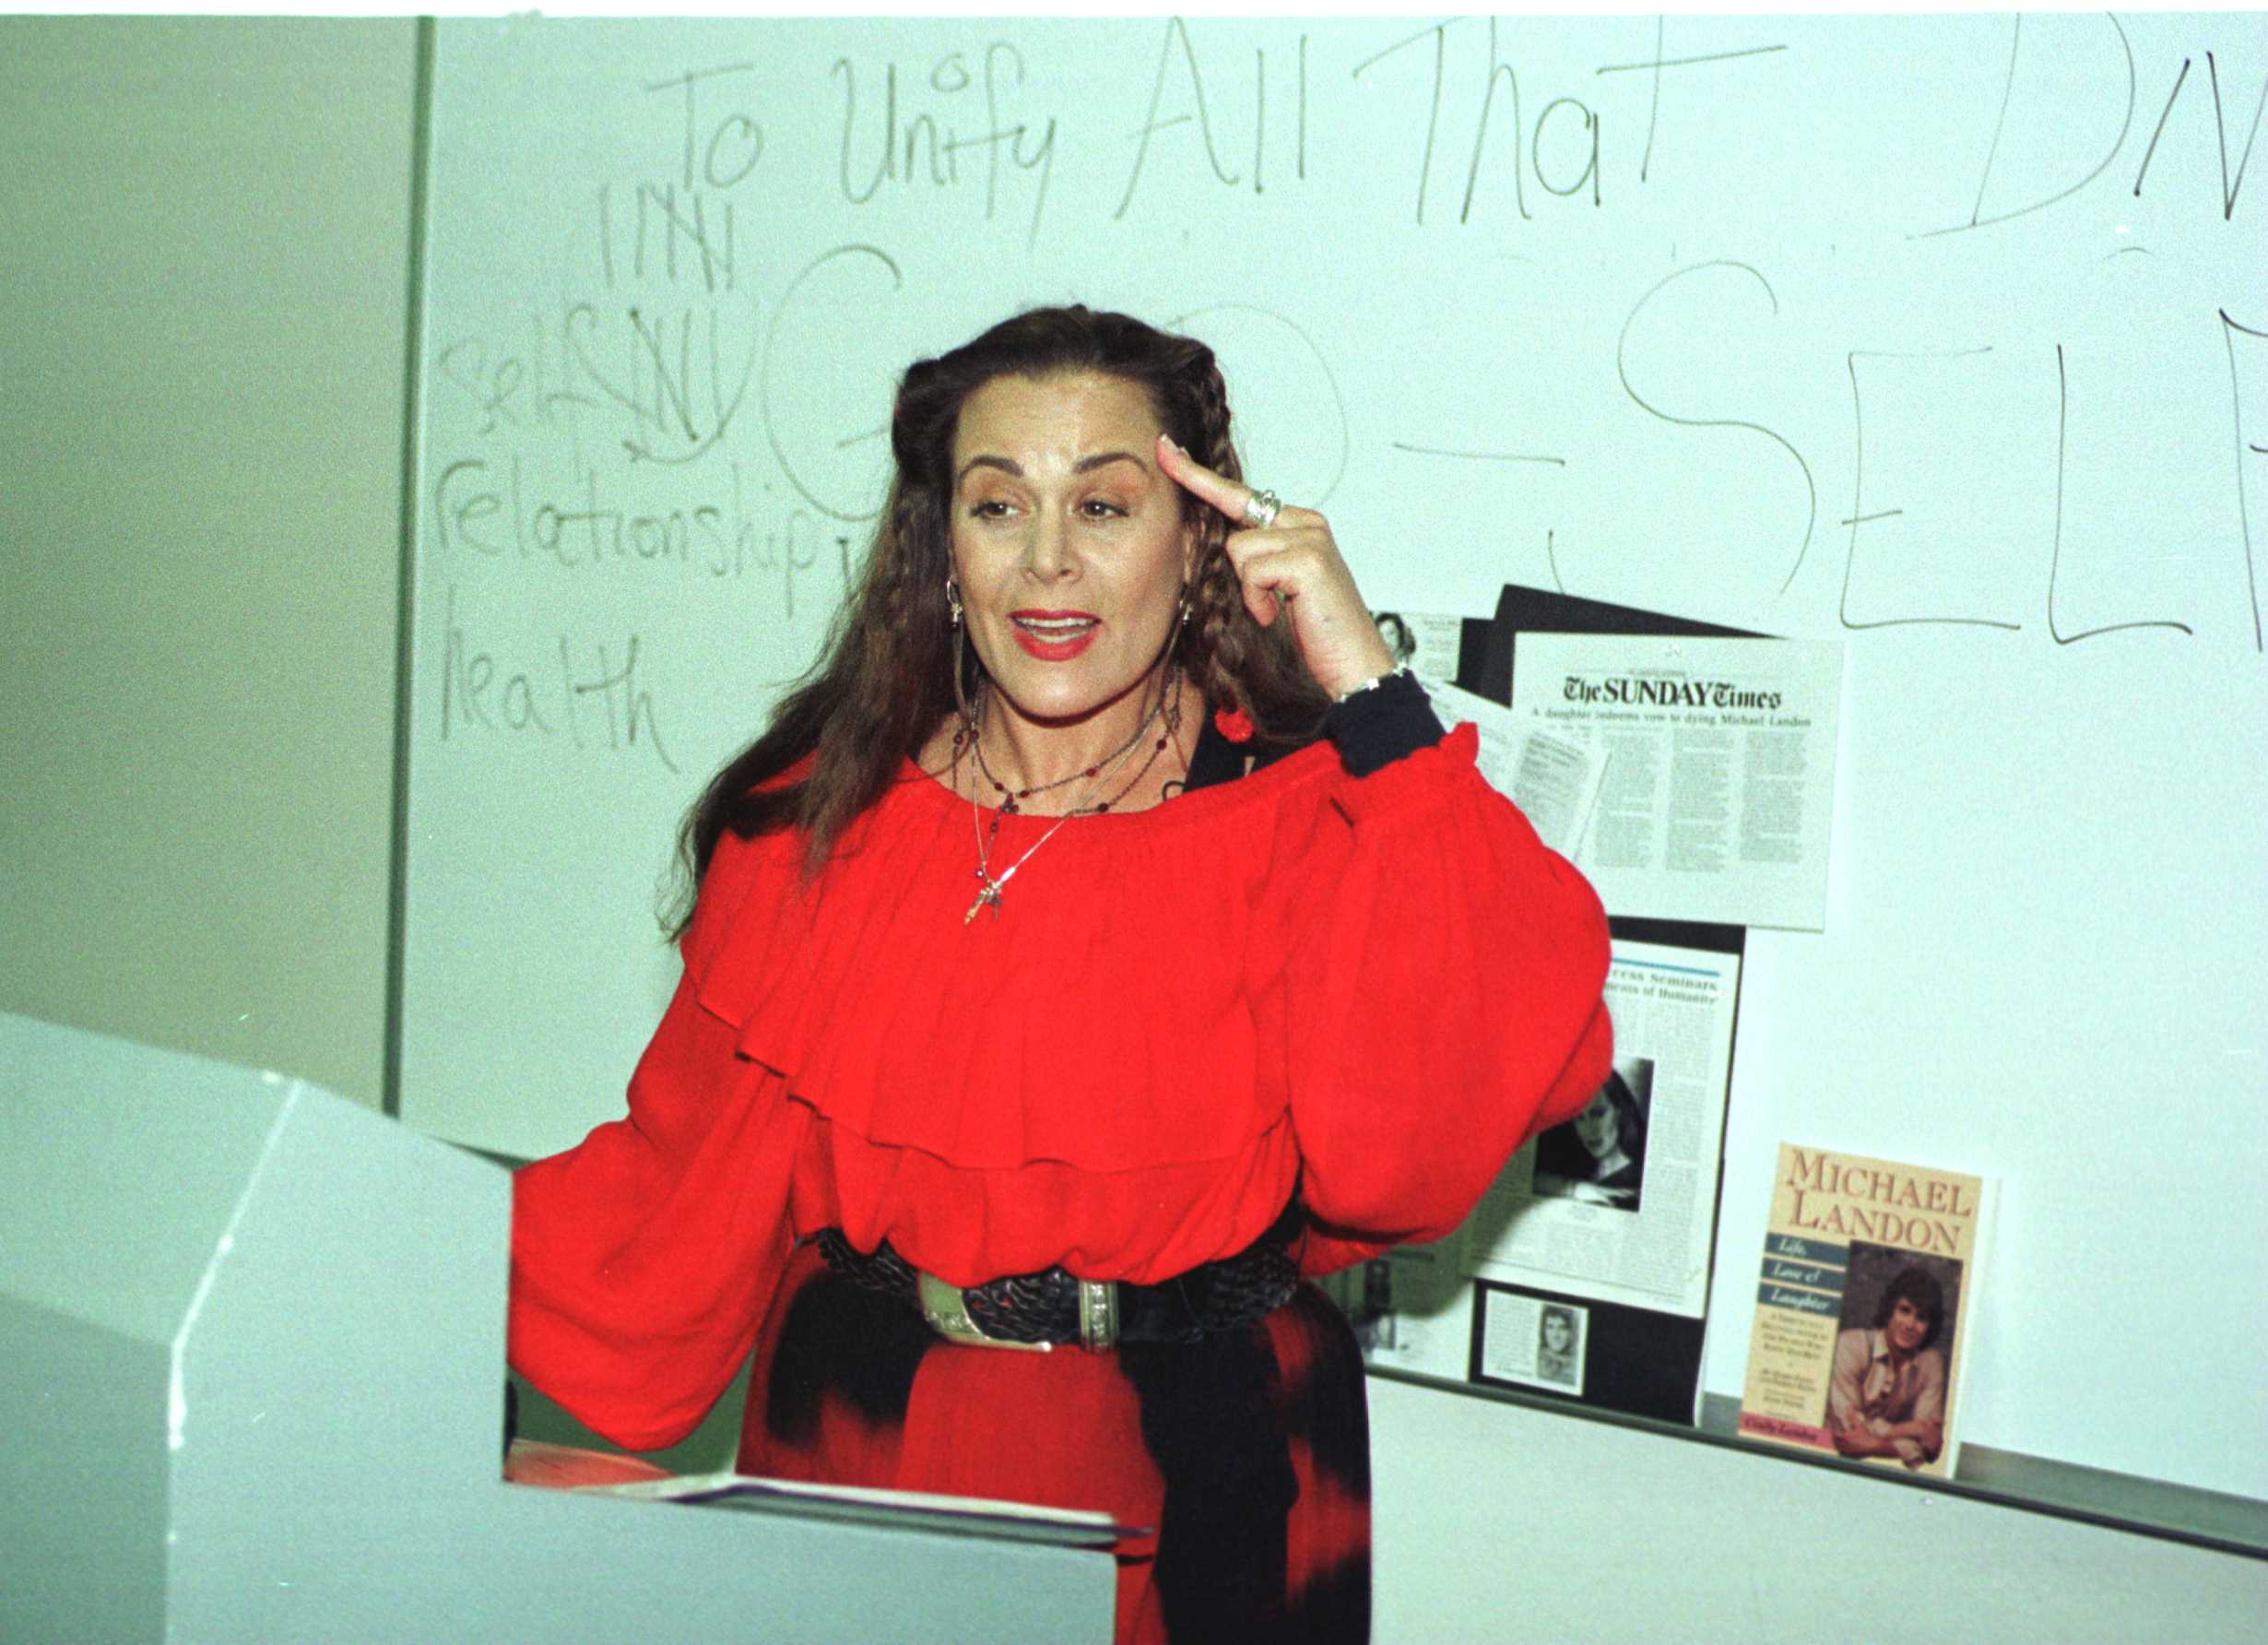 Cheryl Landon giving a lecture at CBS Studios on November 6, 1999, in Studio City, California. | Source: Andrew Shawaf/Getty Images